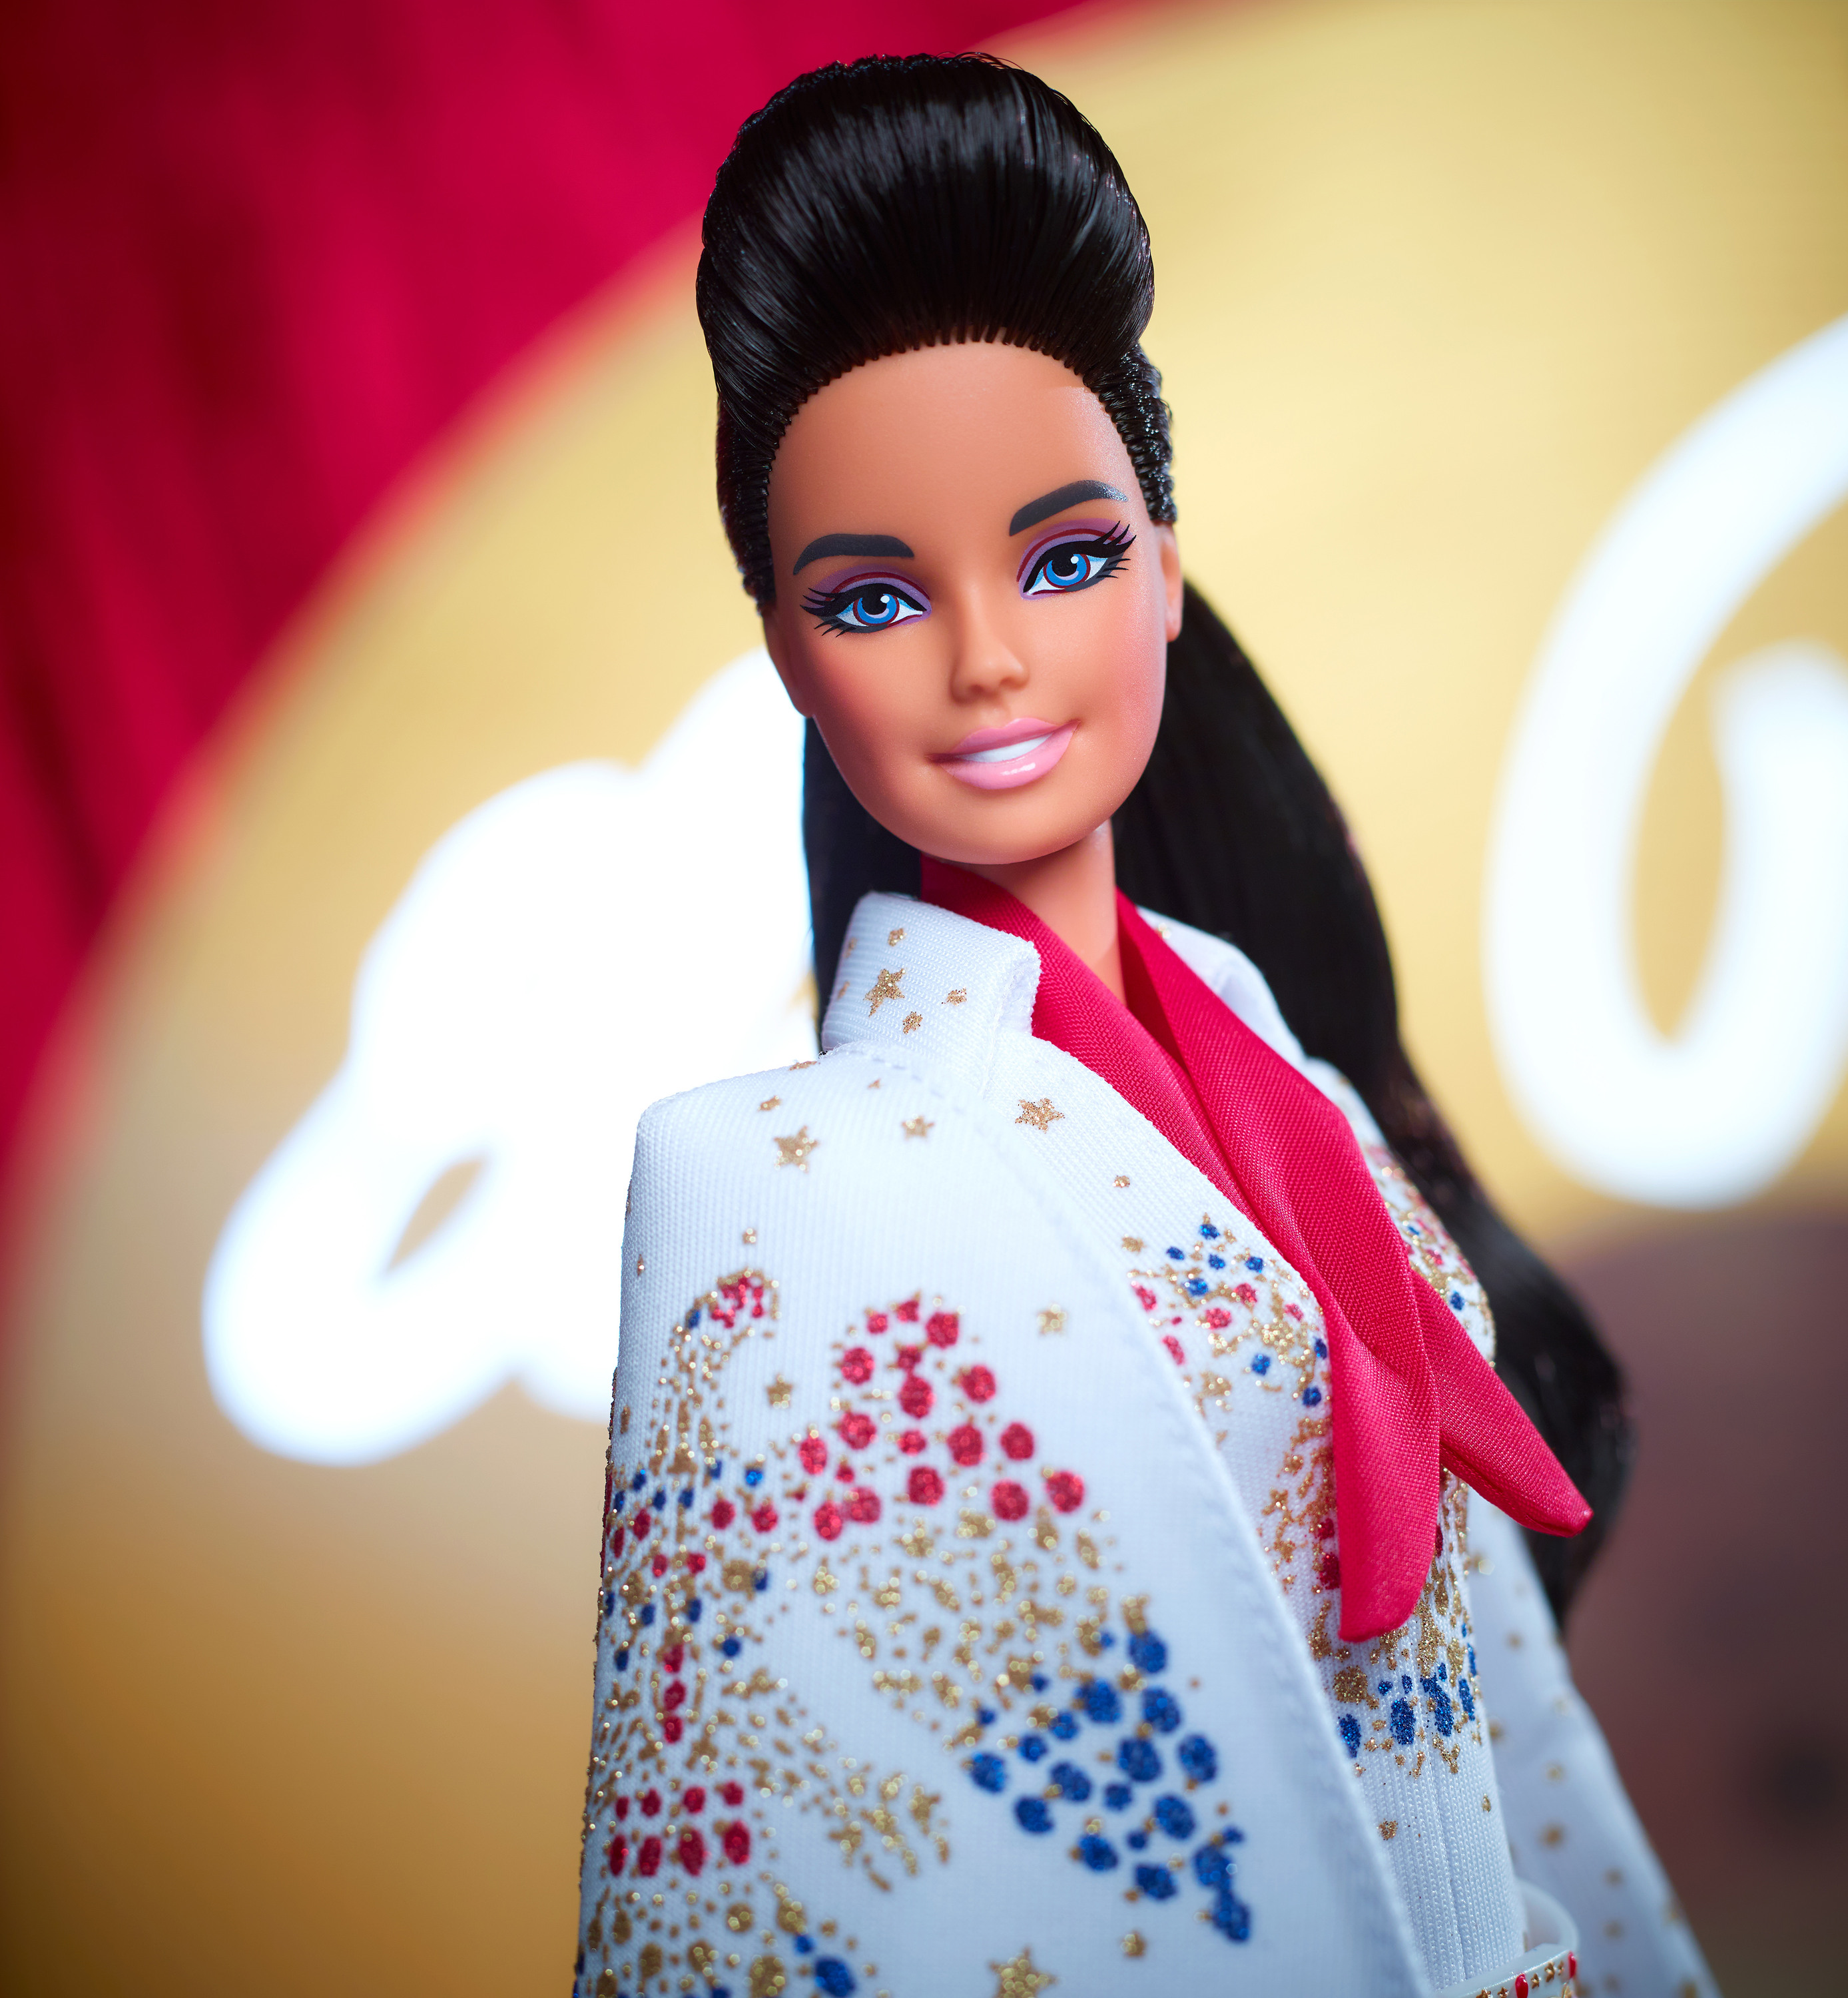 Barbie Signature Elvis Presley Collectible Barbie Doll Wearing "American Eagle" Jumpsuit - image 4 of 7